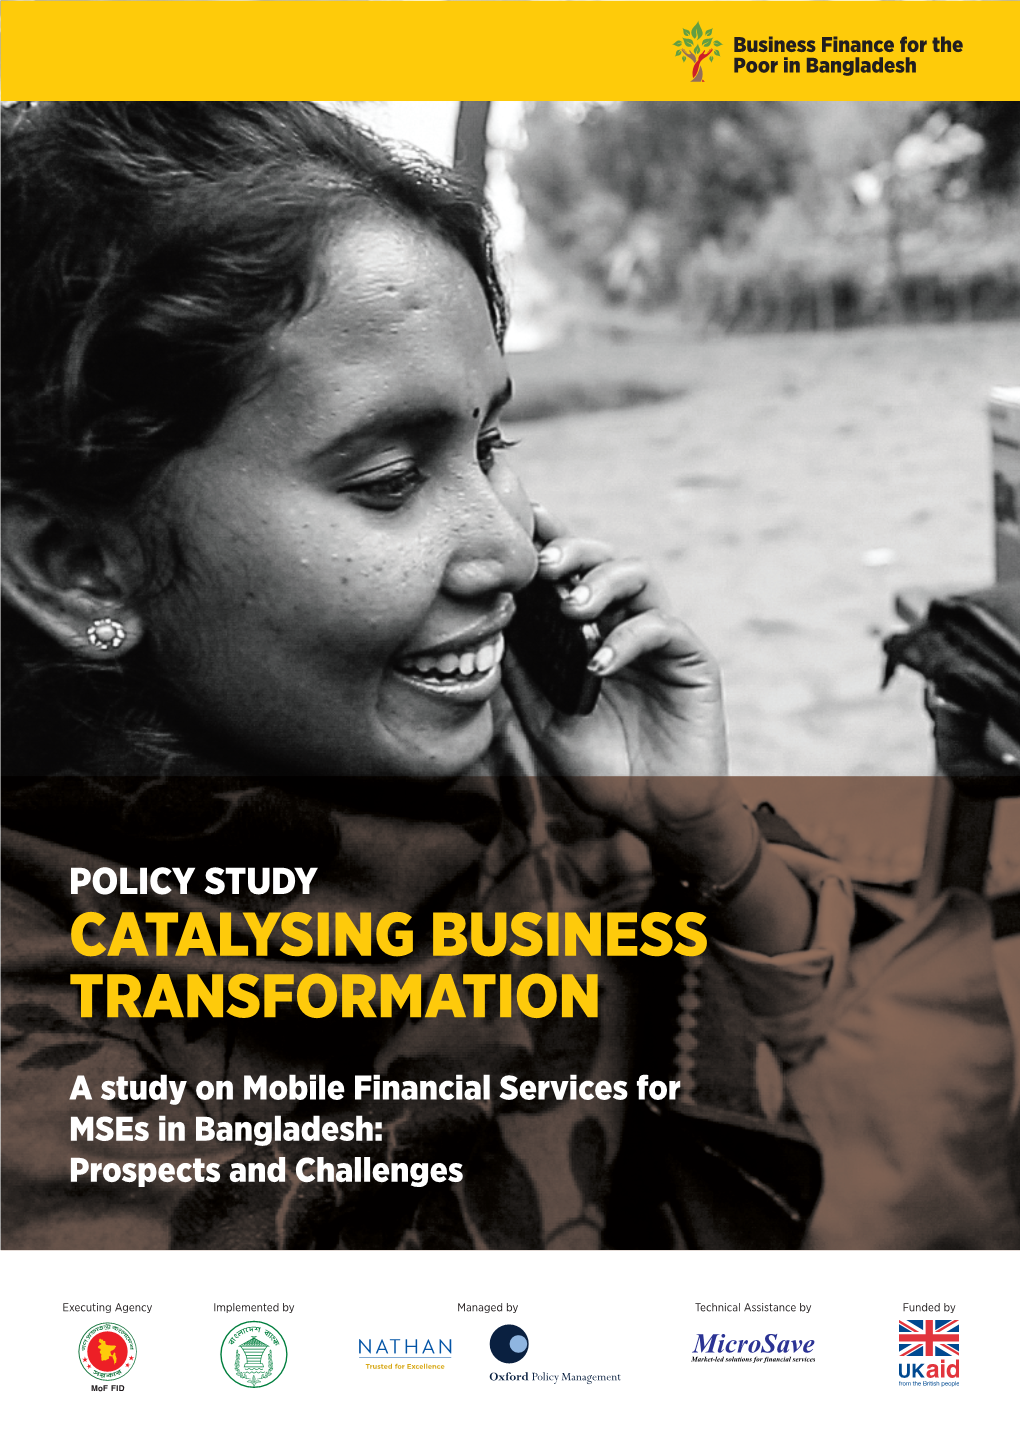 Policy Study Catalysing Business Transformation